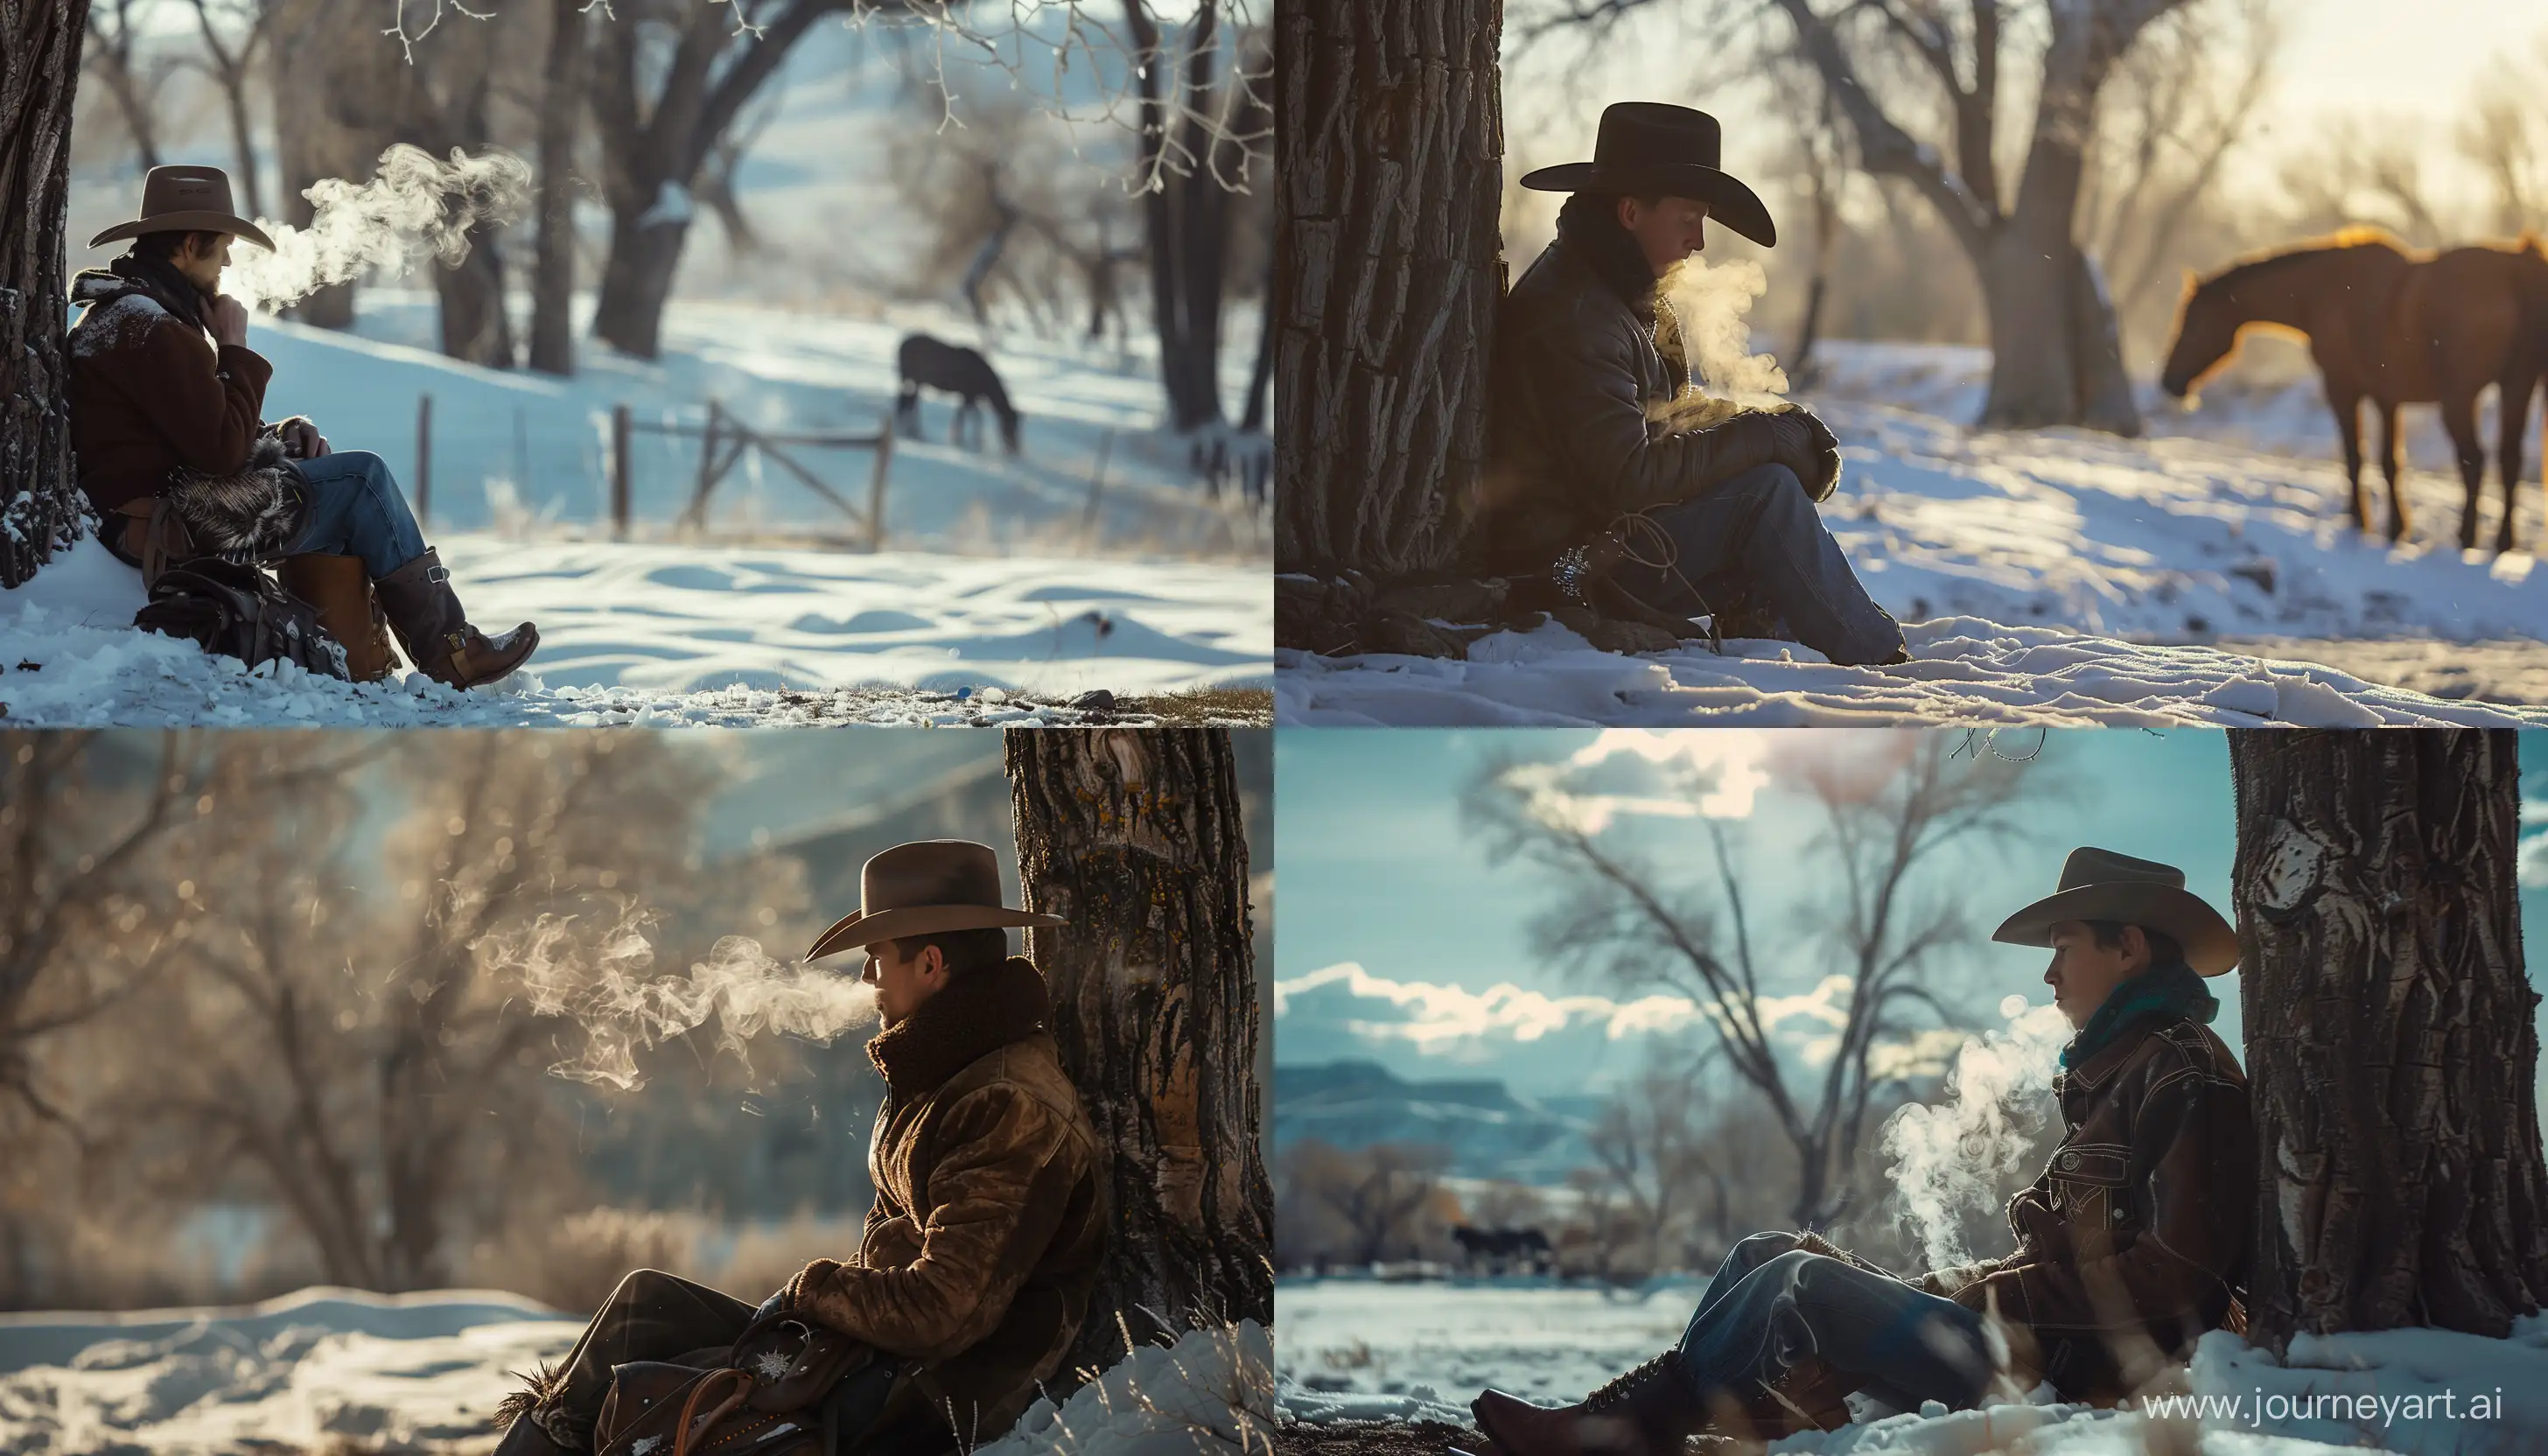 Lone-Cowboy-Sitting-by-Snowy-Tree-with-Steaming-Breath